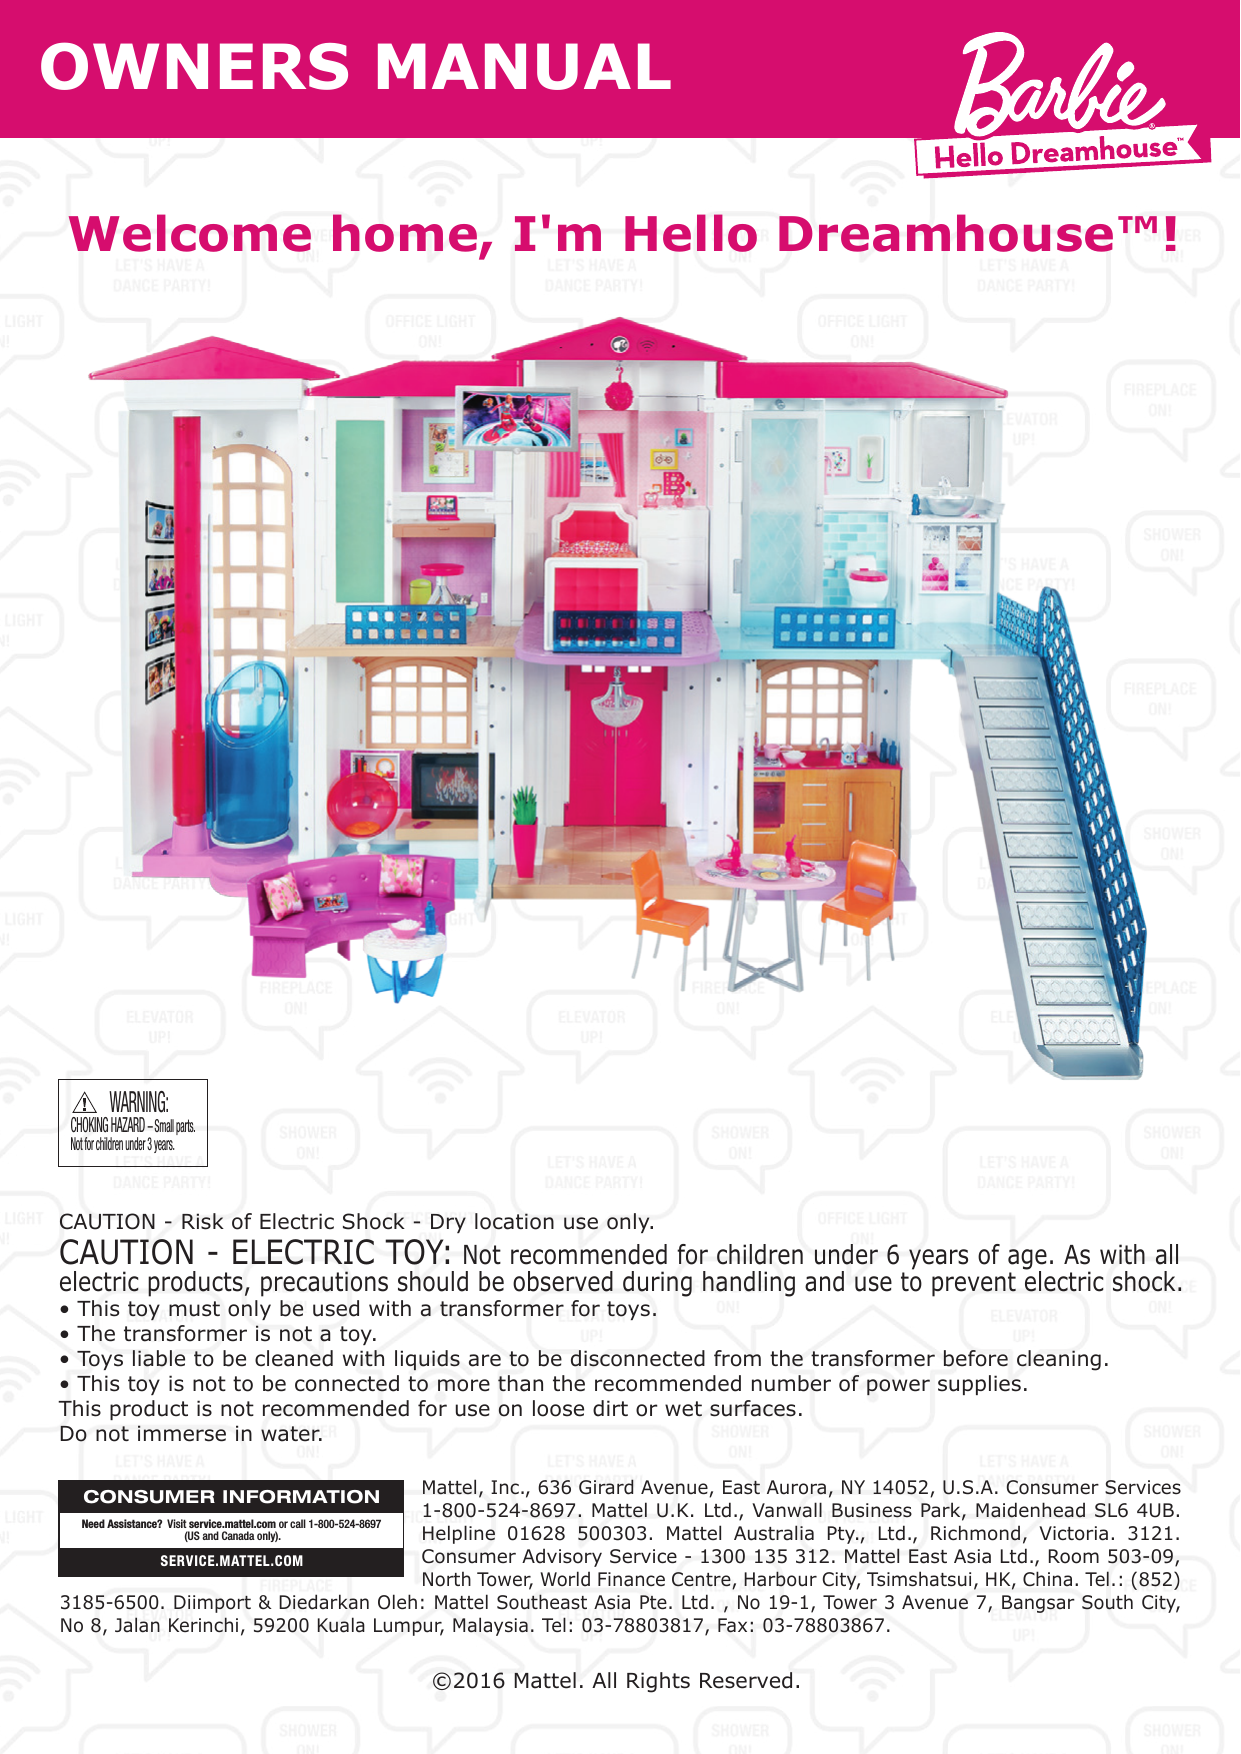 OWNERS MANUALWelcome home, I&apos;m Hello Dreamhouse™!CHOKING HAZARD – Small parts.Not for children under 3 years.WARNING:Mattel, Inc., 636 Girard Avenue, East Aurora, NY 14052, U.S.A. Consumer Services 1-800-524-8697. Mattel U.K. Ltd., Vanwall Business Park, Maidenhead SL6 4UB. Helpline 01628 500303. Mattel Australia Pty., Ltd., Richmond, Victoria. 3121. Consumer Advisory Service - 1300 135 312. Mattel East Asia Ltd., Room 503-09, North Tower, World Finance Centre, Harbour City, Tsimshatsui, HK, China. Tel.: (852) 3185-6500. Diimport &amp; Diedarkan Oleh: Mattel Southeast Asia Pte. Ltd. , No 19-1, Tower 3 Avenue 7, Bangsar South City, No 8, Jalan Kerinchi, 59200 Kuala Lumpur, Malaysia. Tel: 03-78803817, Fax: 03-78803867.CONSUMER INFORMATIONSERVICE.MATTEL.COMNeed Assistance?  Visit service.mattel.com or call 1-800-524-8697 (US and Canada only).©2016 Mattel. All Rights Reserved. CAUTION - Risk of Electric Shock - Dry location use only.CAUTION - ELECTRIC TOY: Not recommended for children under 6 years of age. As with all electric products, precautions should be observed during handling and use to prevent electric shock.• This toy must only be used with a transformer for toys.• The transformer is not a toy.• Toys liable to be cleaned with liquids are to be disconnected from the transformer before cleaning.• This toy is not to be connected to more than the recommended number of power supplies.This product is not recommended for use on loose dirt or wet surfaces.Do not immerse in water.